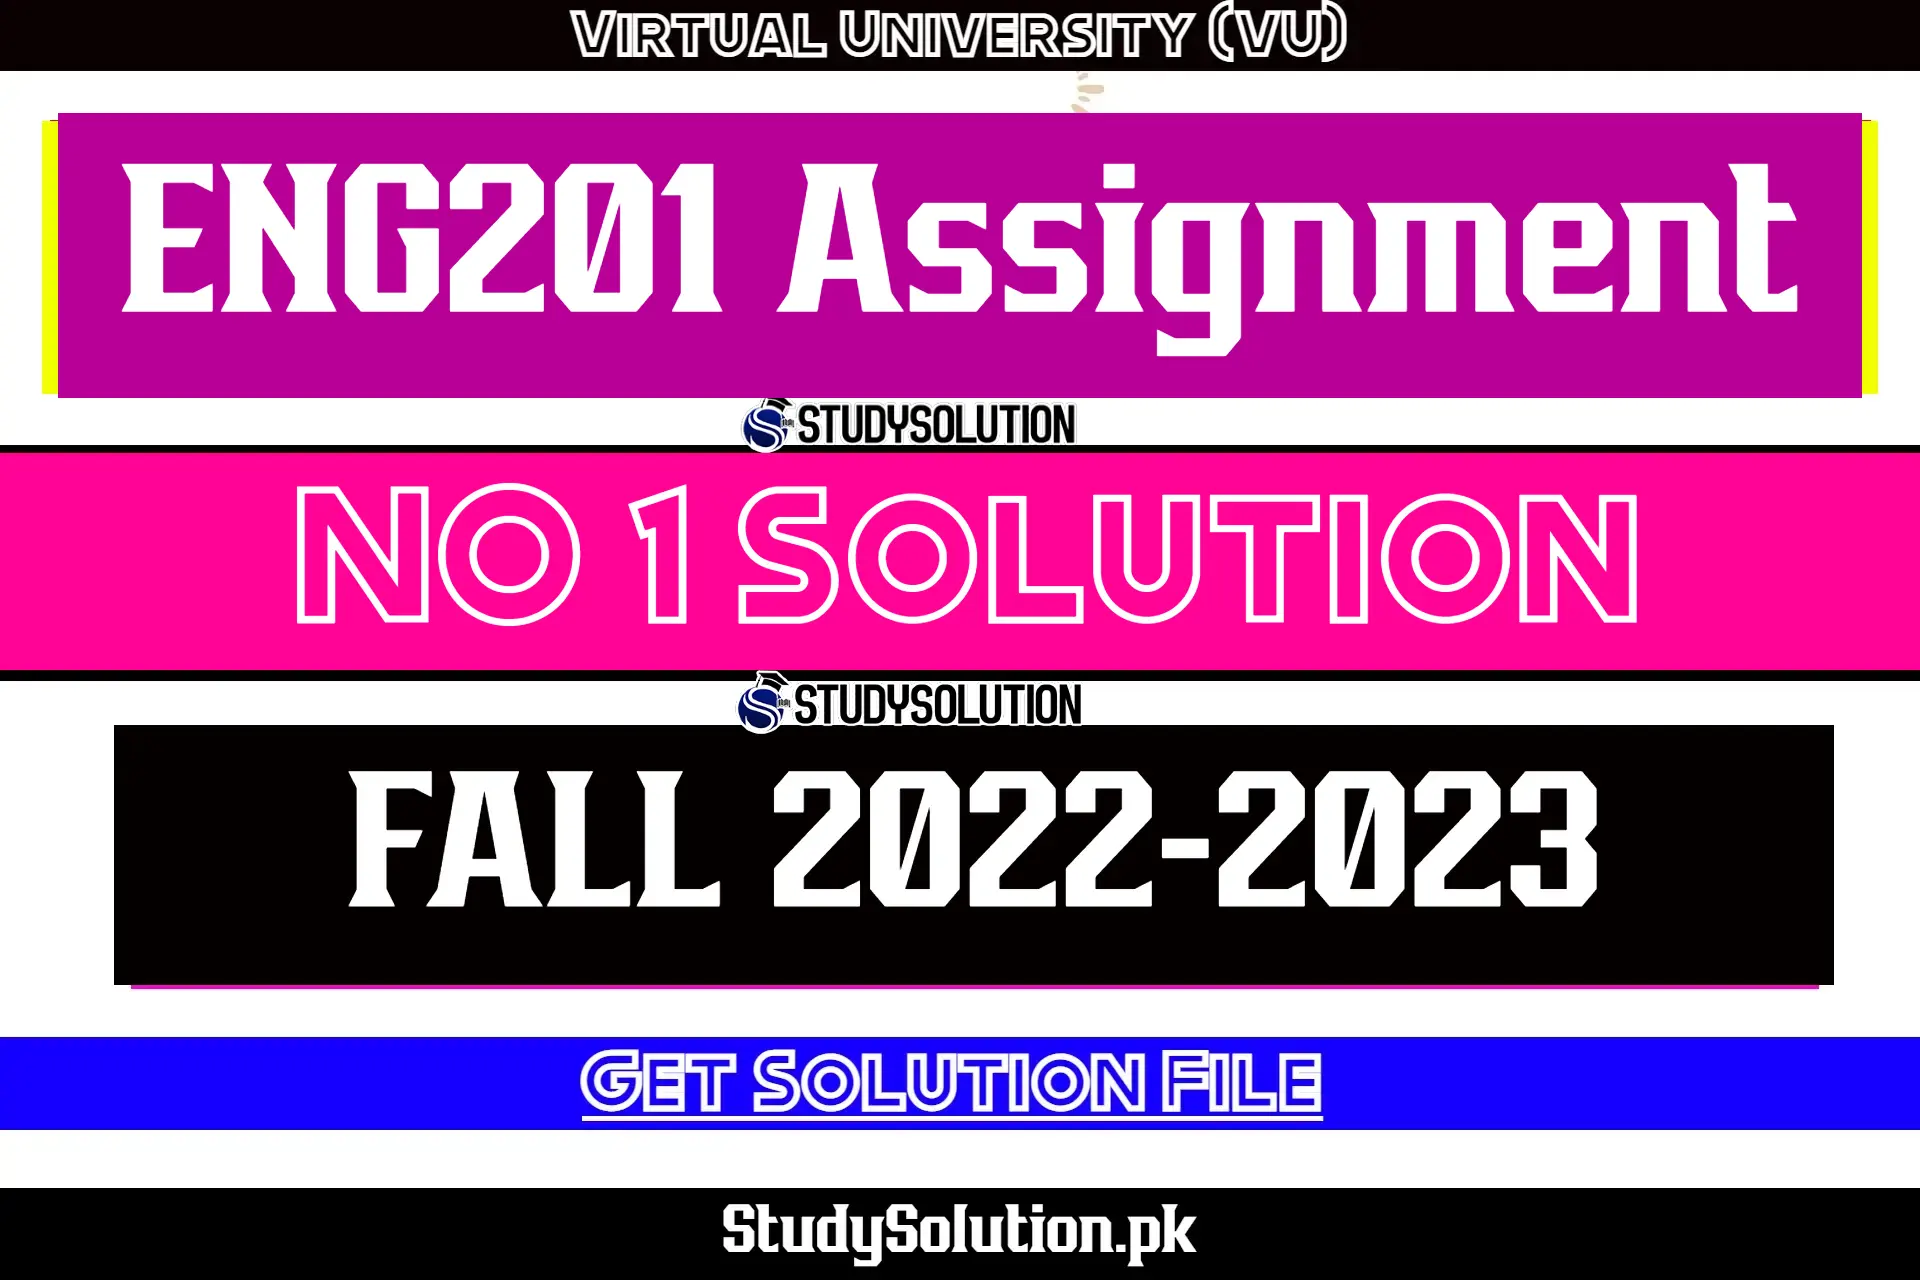 ENG201 Assignment No 1 Solution Fall 2022